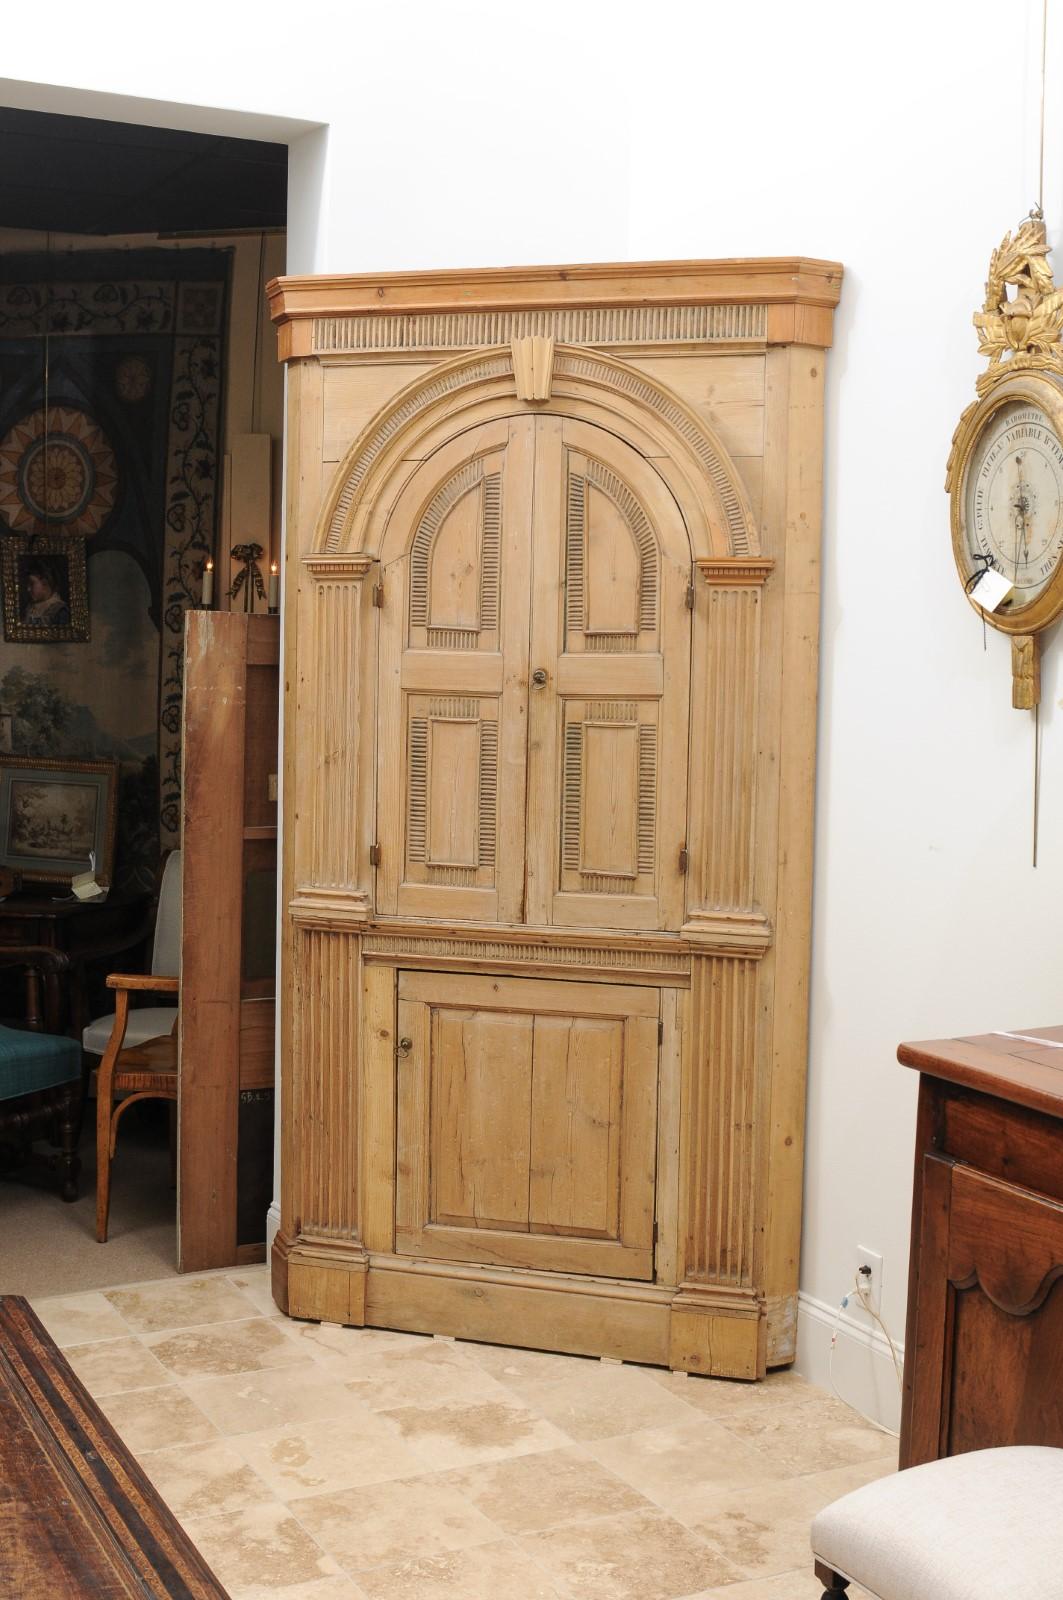 19th Century English Pine Corner Cupboard with Arched Upper Cabinet In Good Condition For Sale In Atlanta, GA